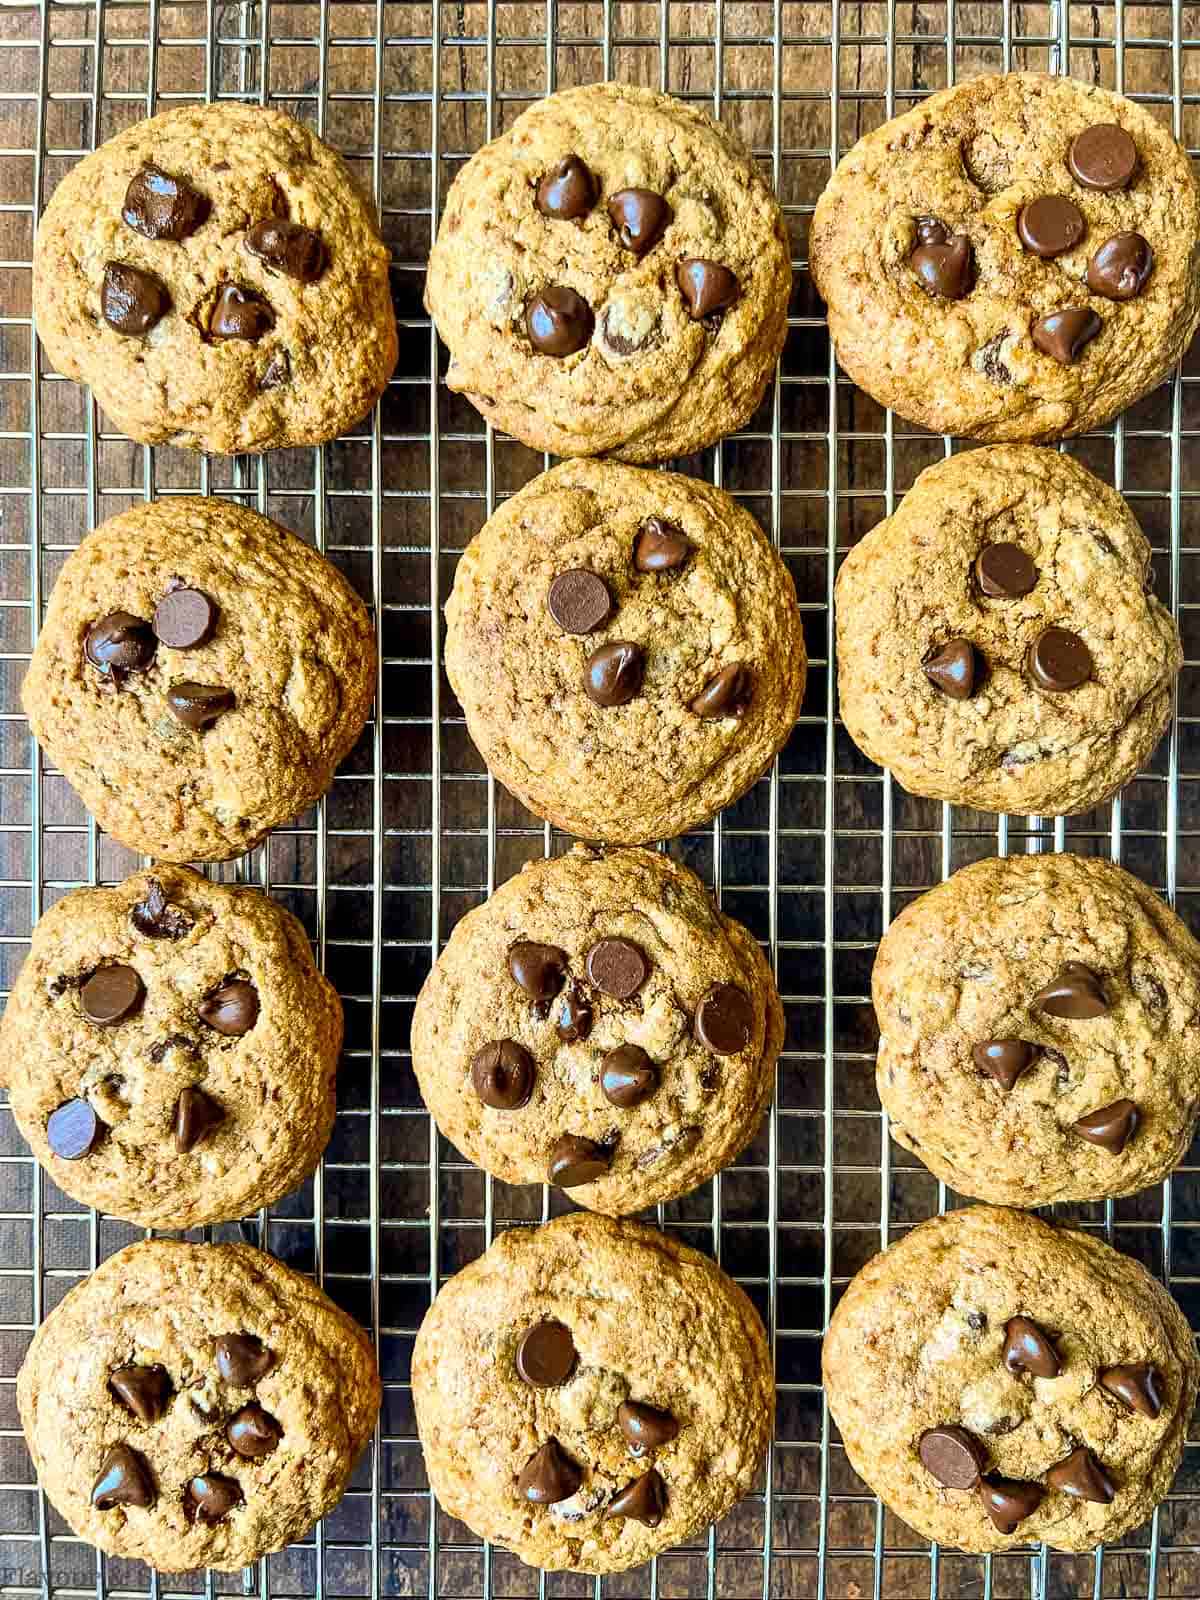 Gluten-free chocolate chip cookies on a cooling rack.